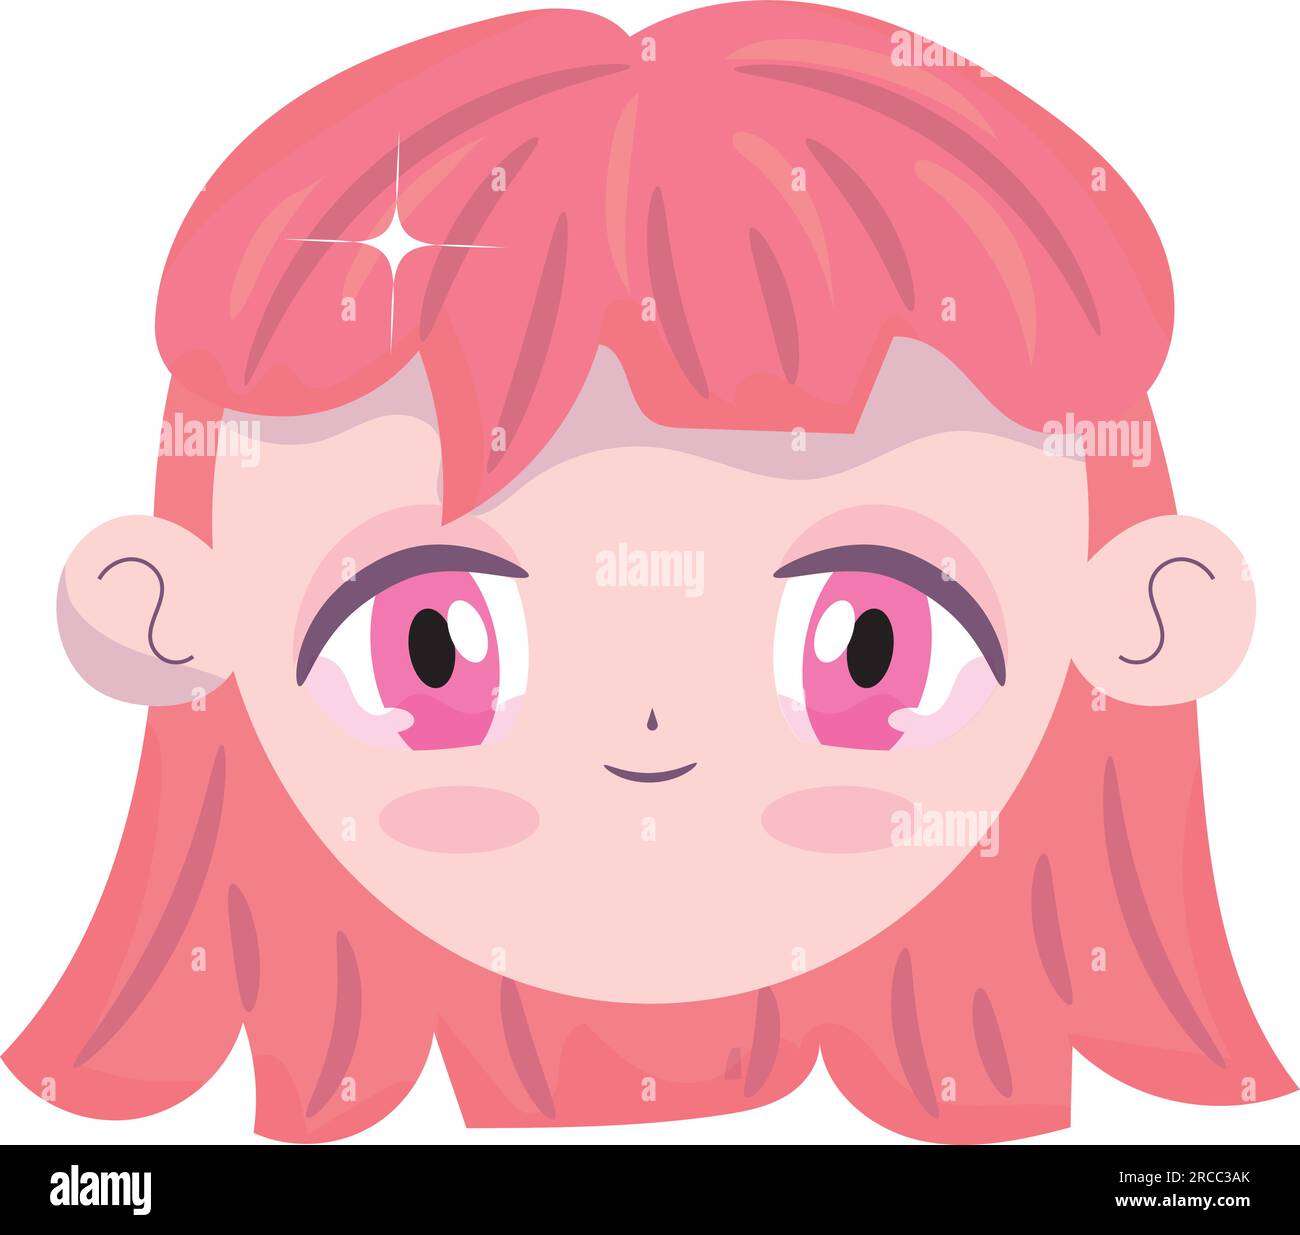 Isolated head of an anime character girl Vector Image